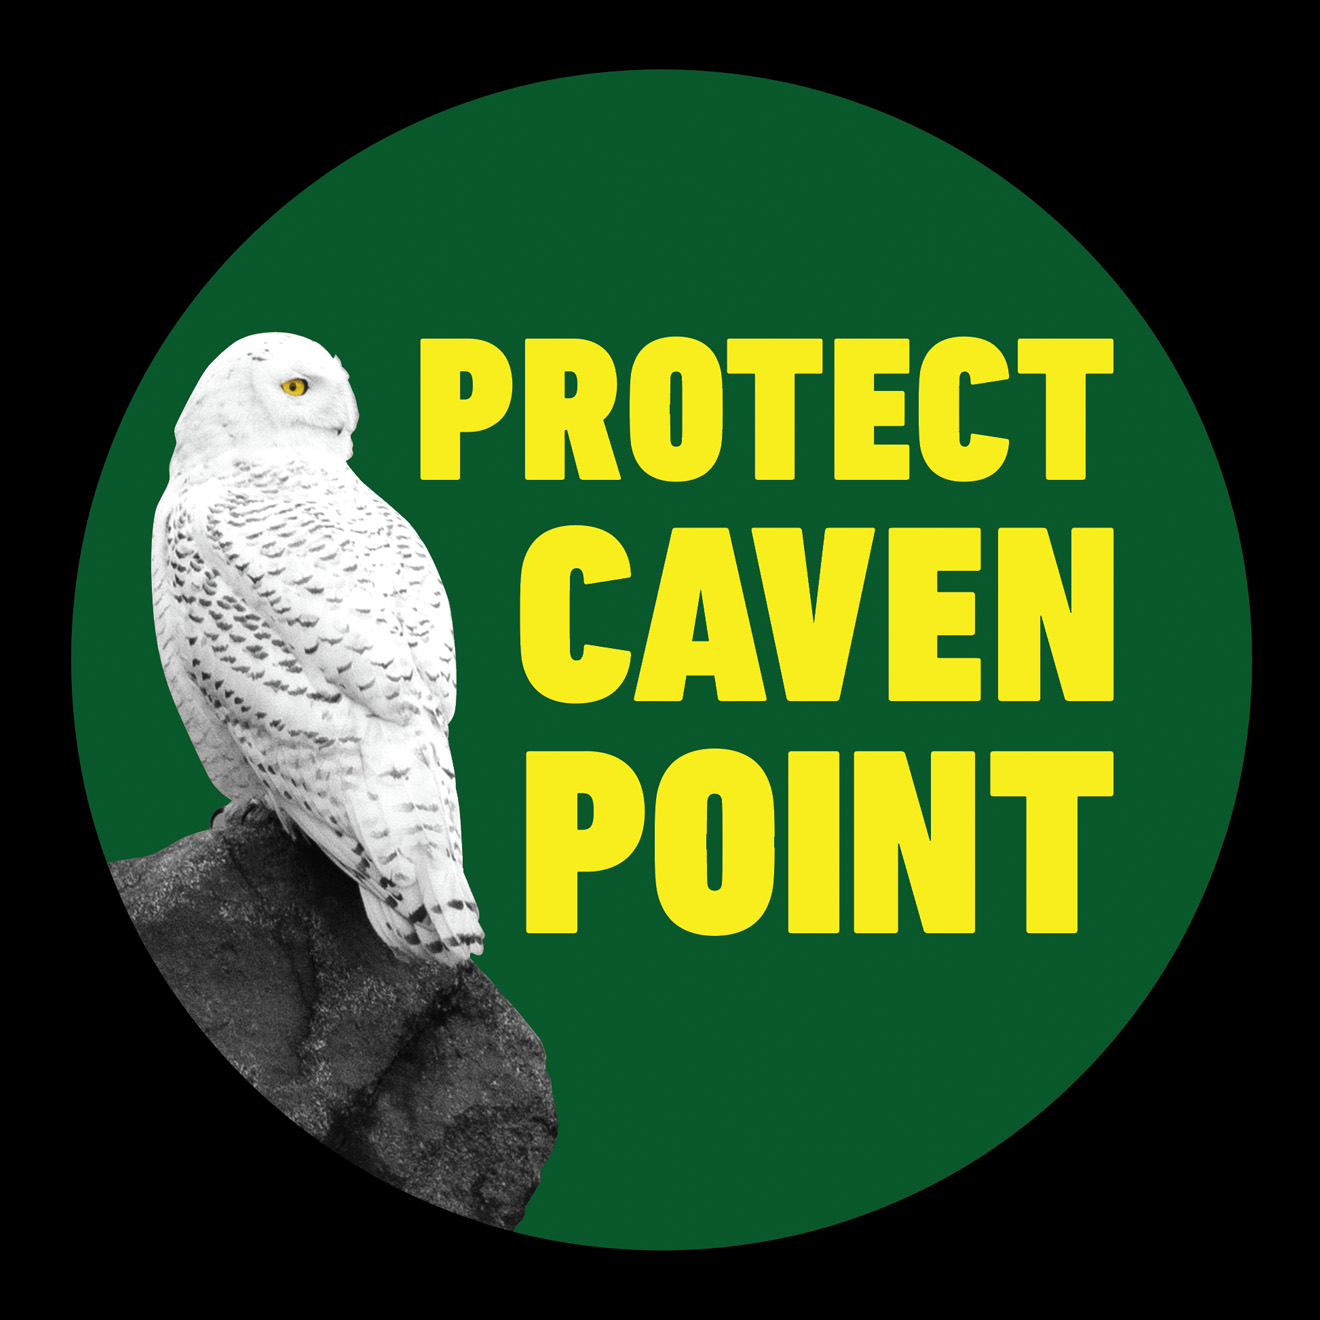 Protect Caven Point and Snowy Owl